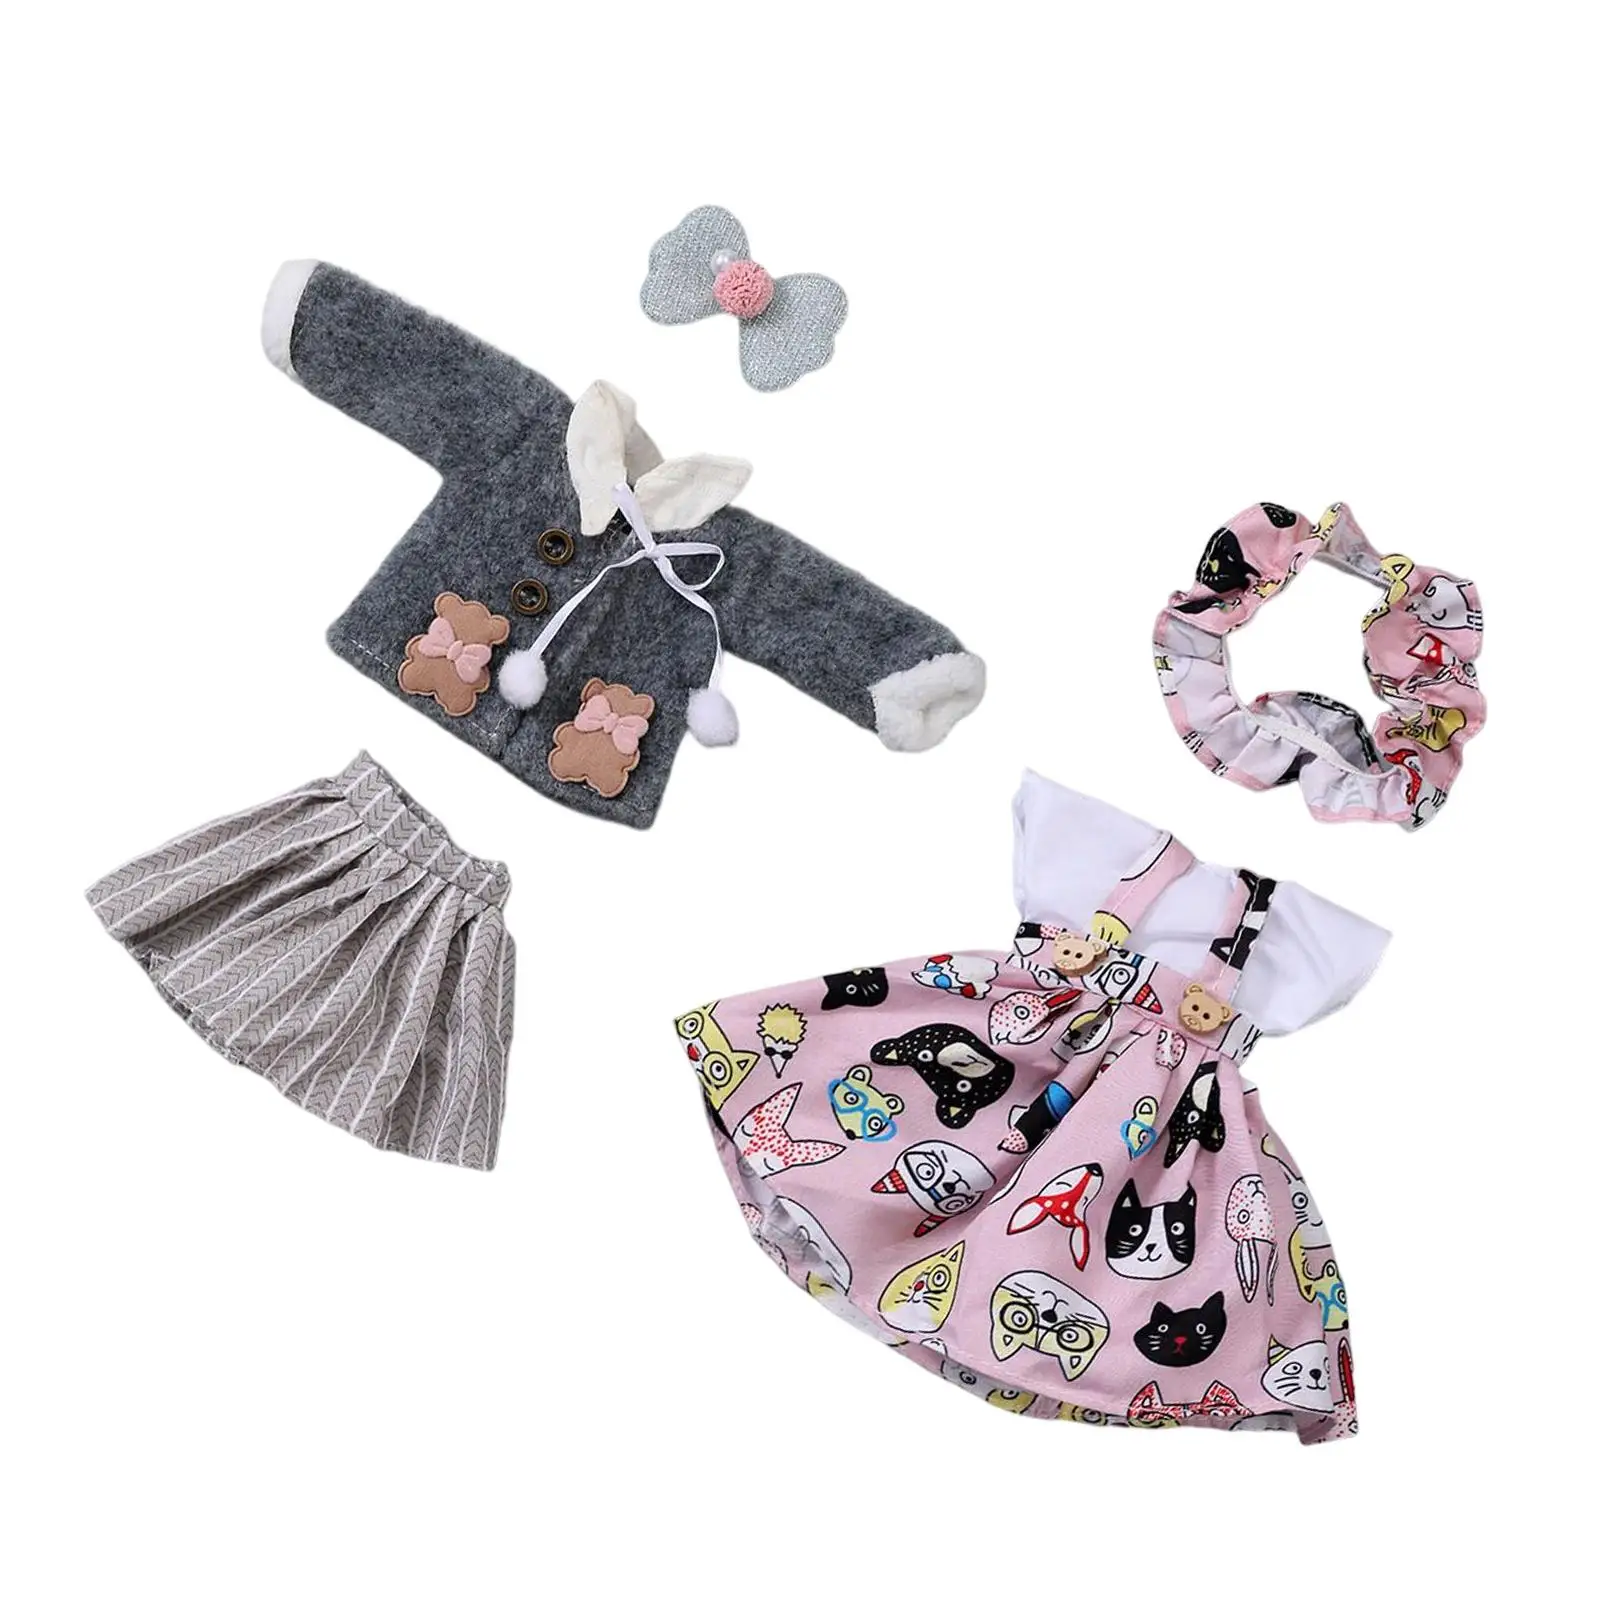 Doll Clothes Princess Dress Clothes Princess doll Clothes Accessories Sets for Game 1/6 Fashion Doll Birthday Gift